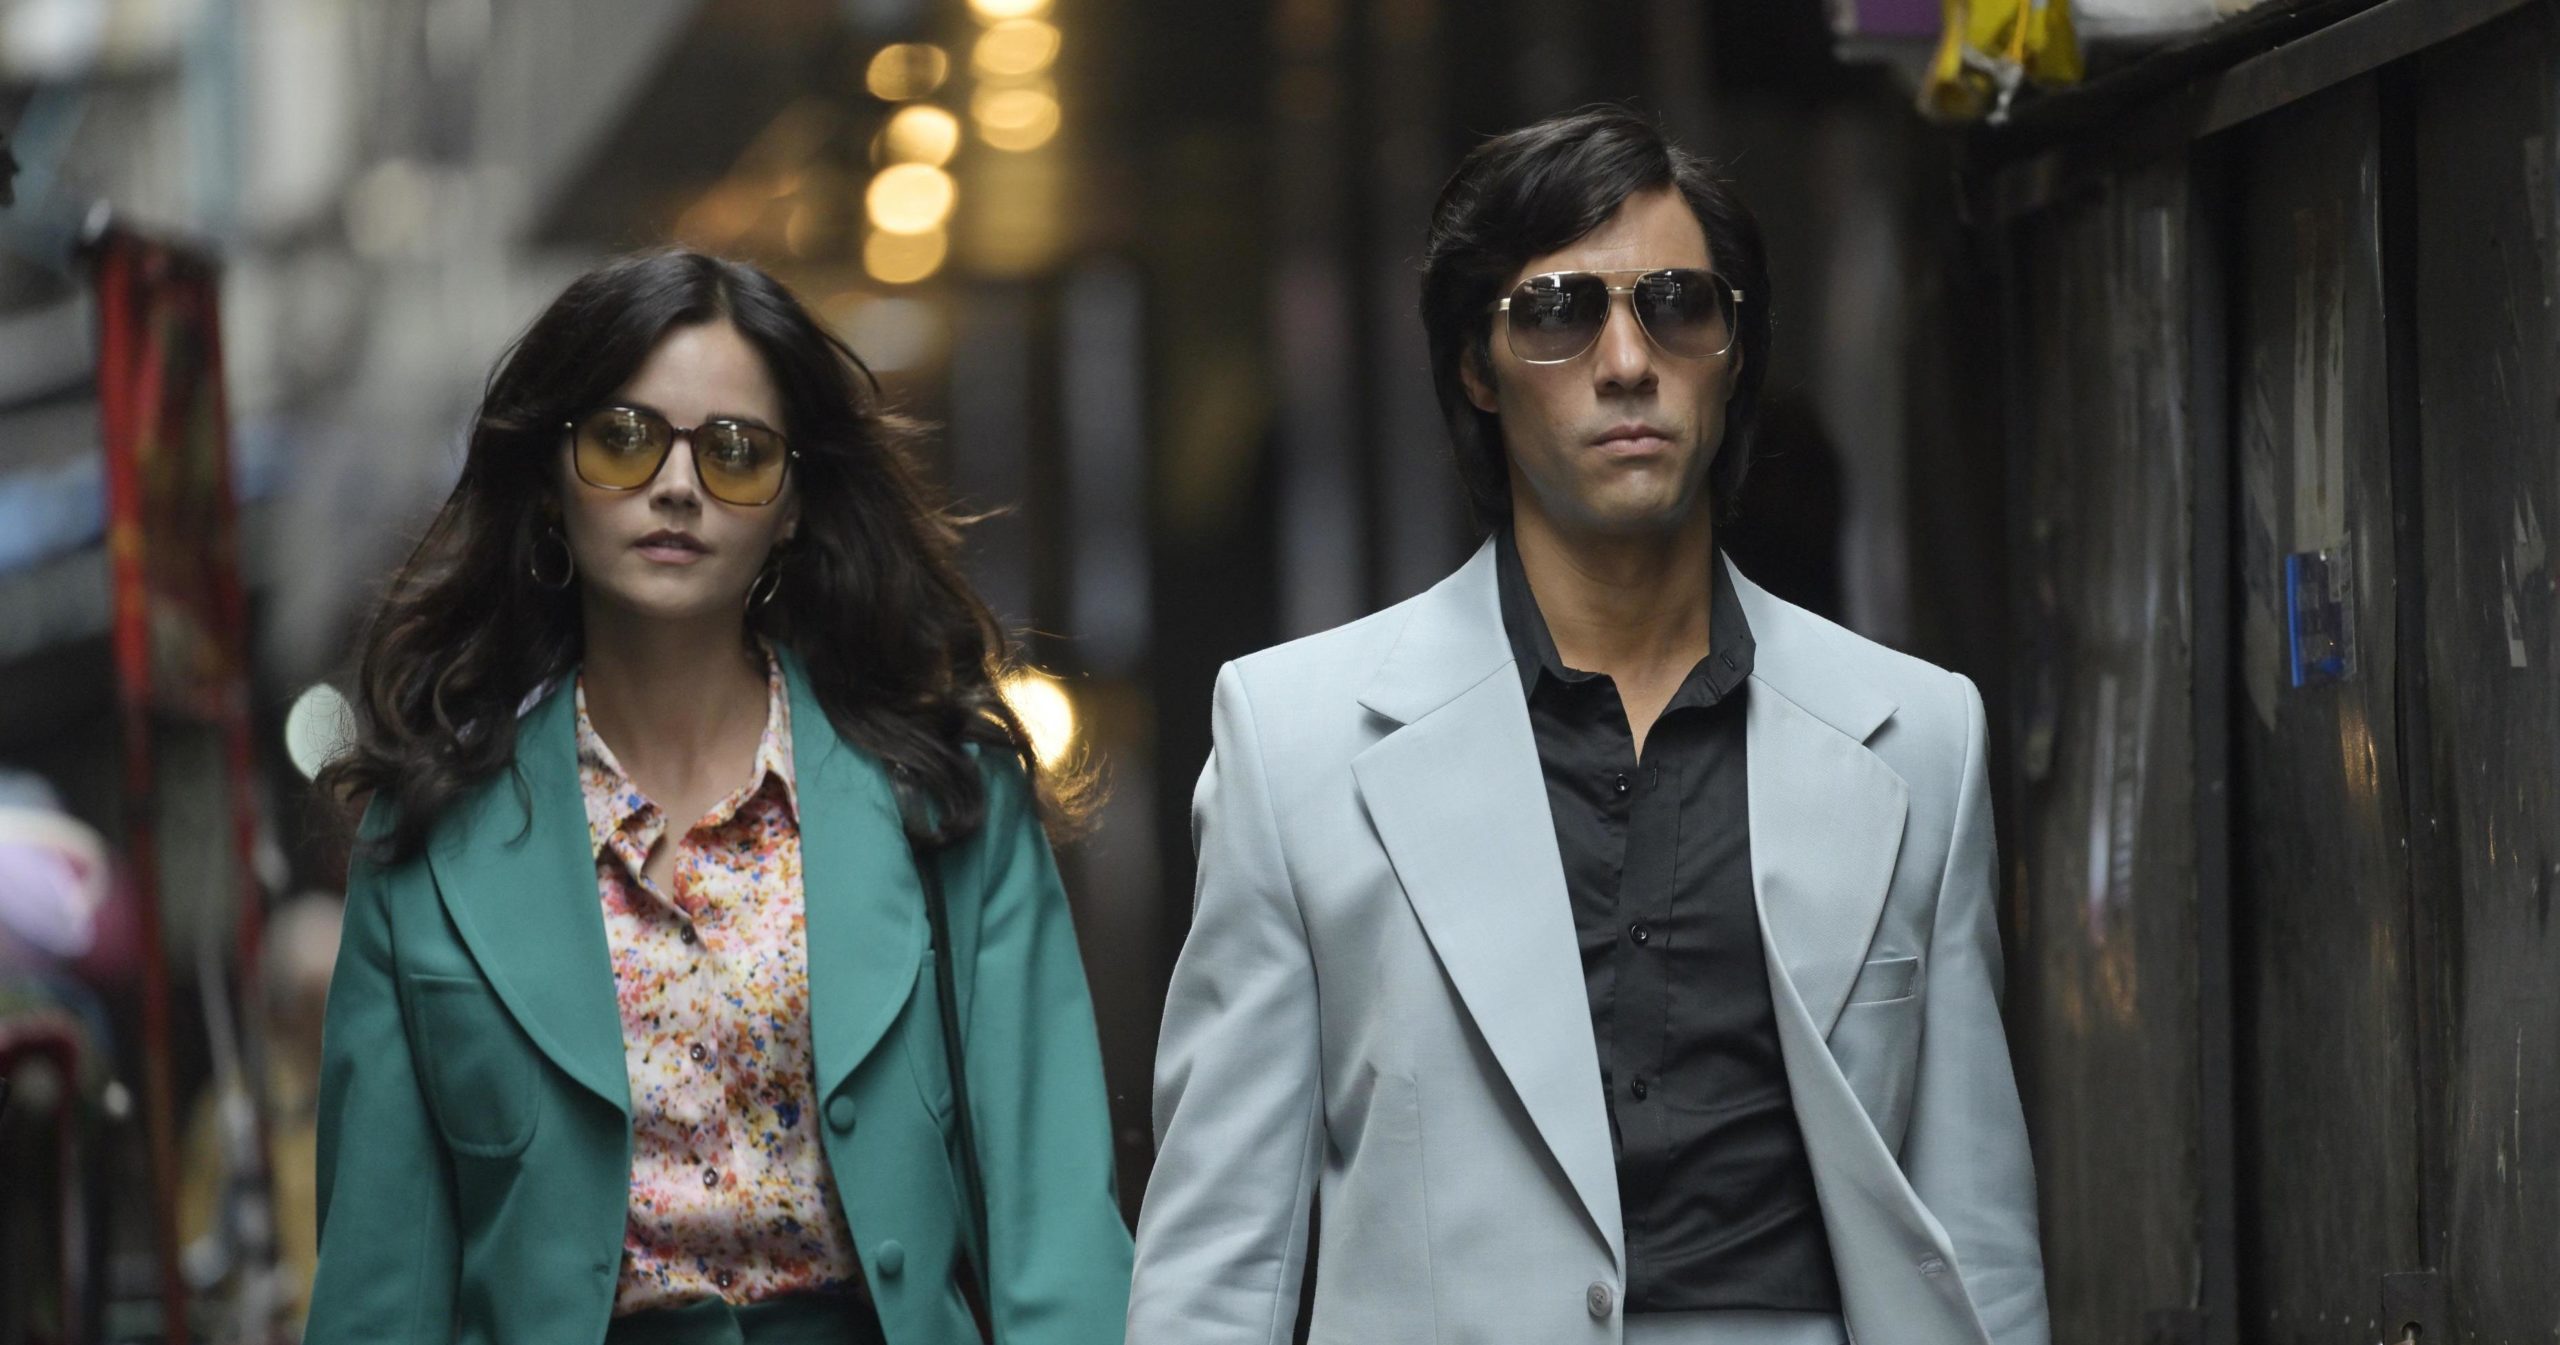 You’re going to love these ’70s-inspired sunglasses from the Netflix show, The Serpent